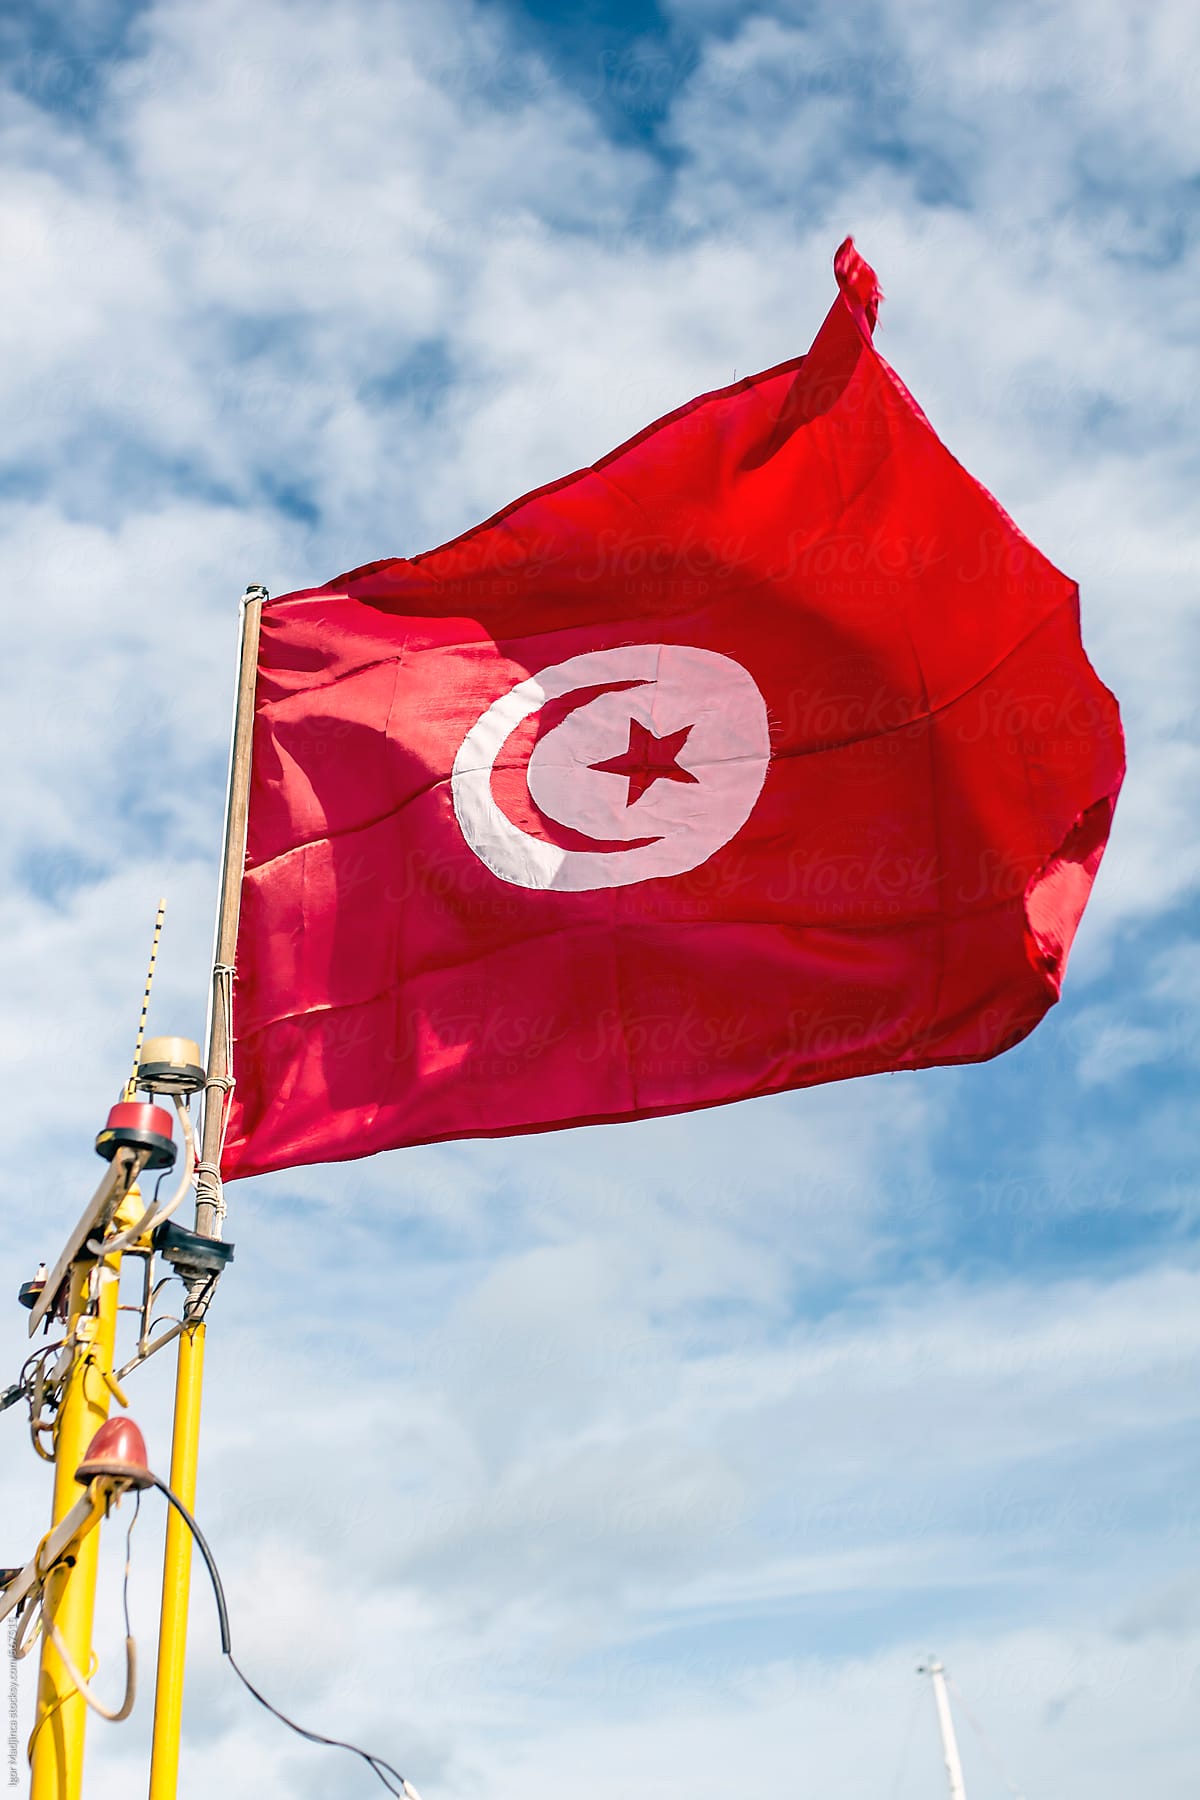 Flag of Tunisia waving in the wind